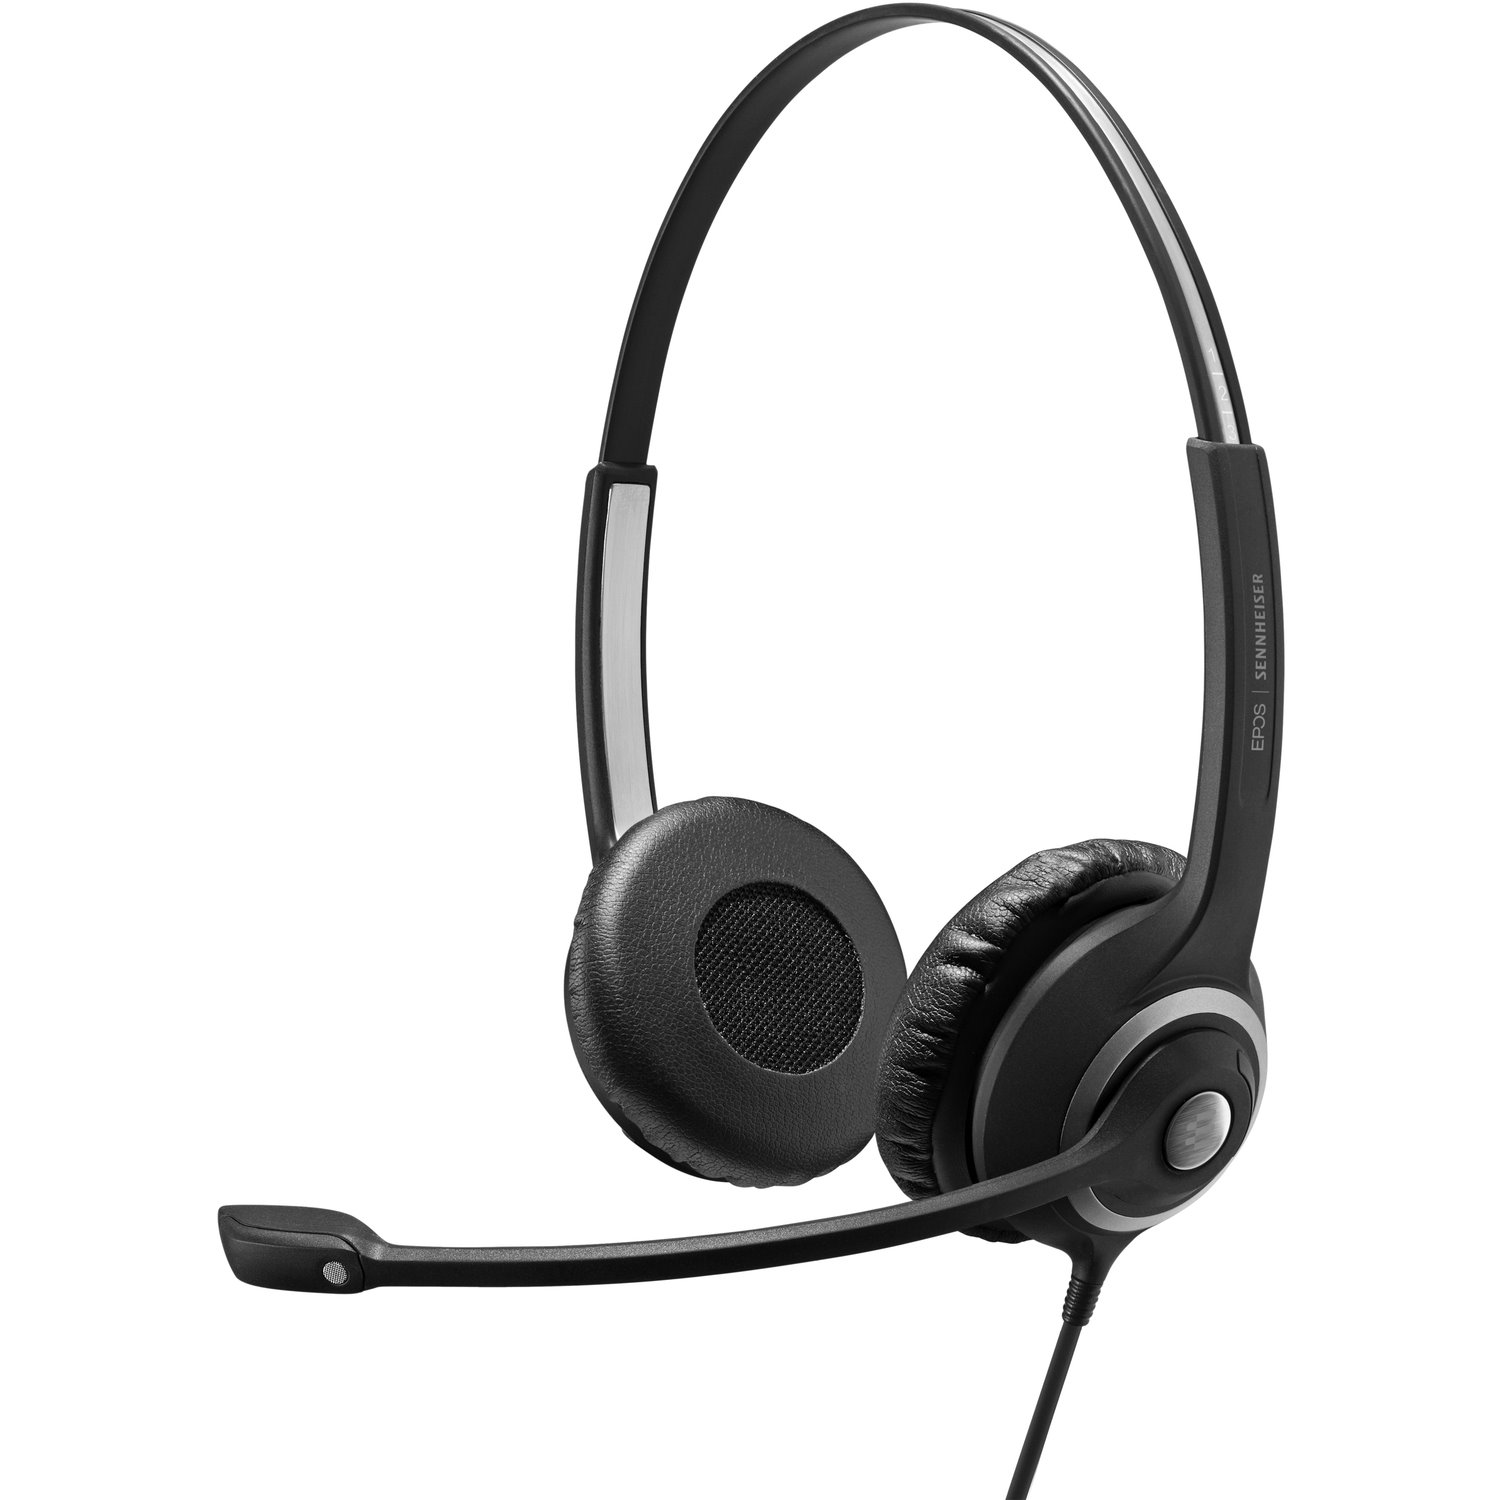 EPOS IMPACT SC 260 Wired On-ear Stereo Headset - Black